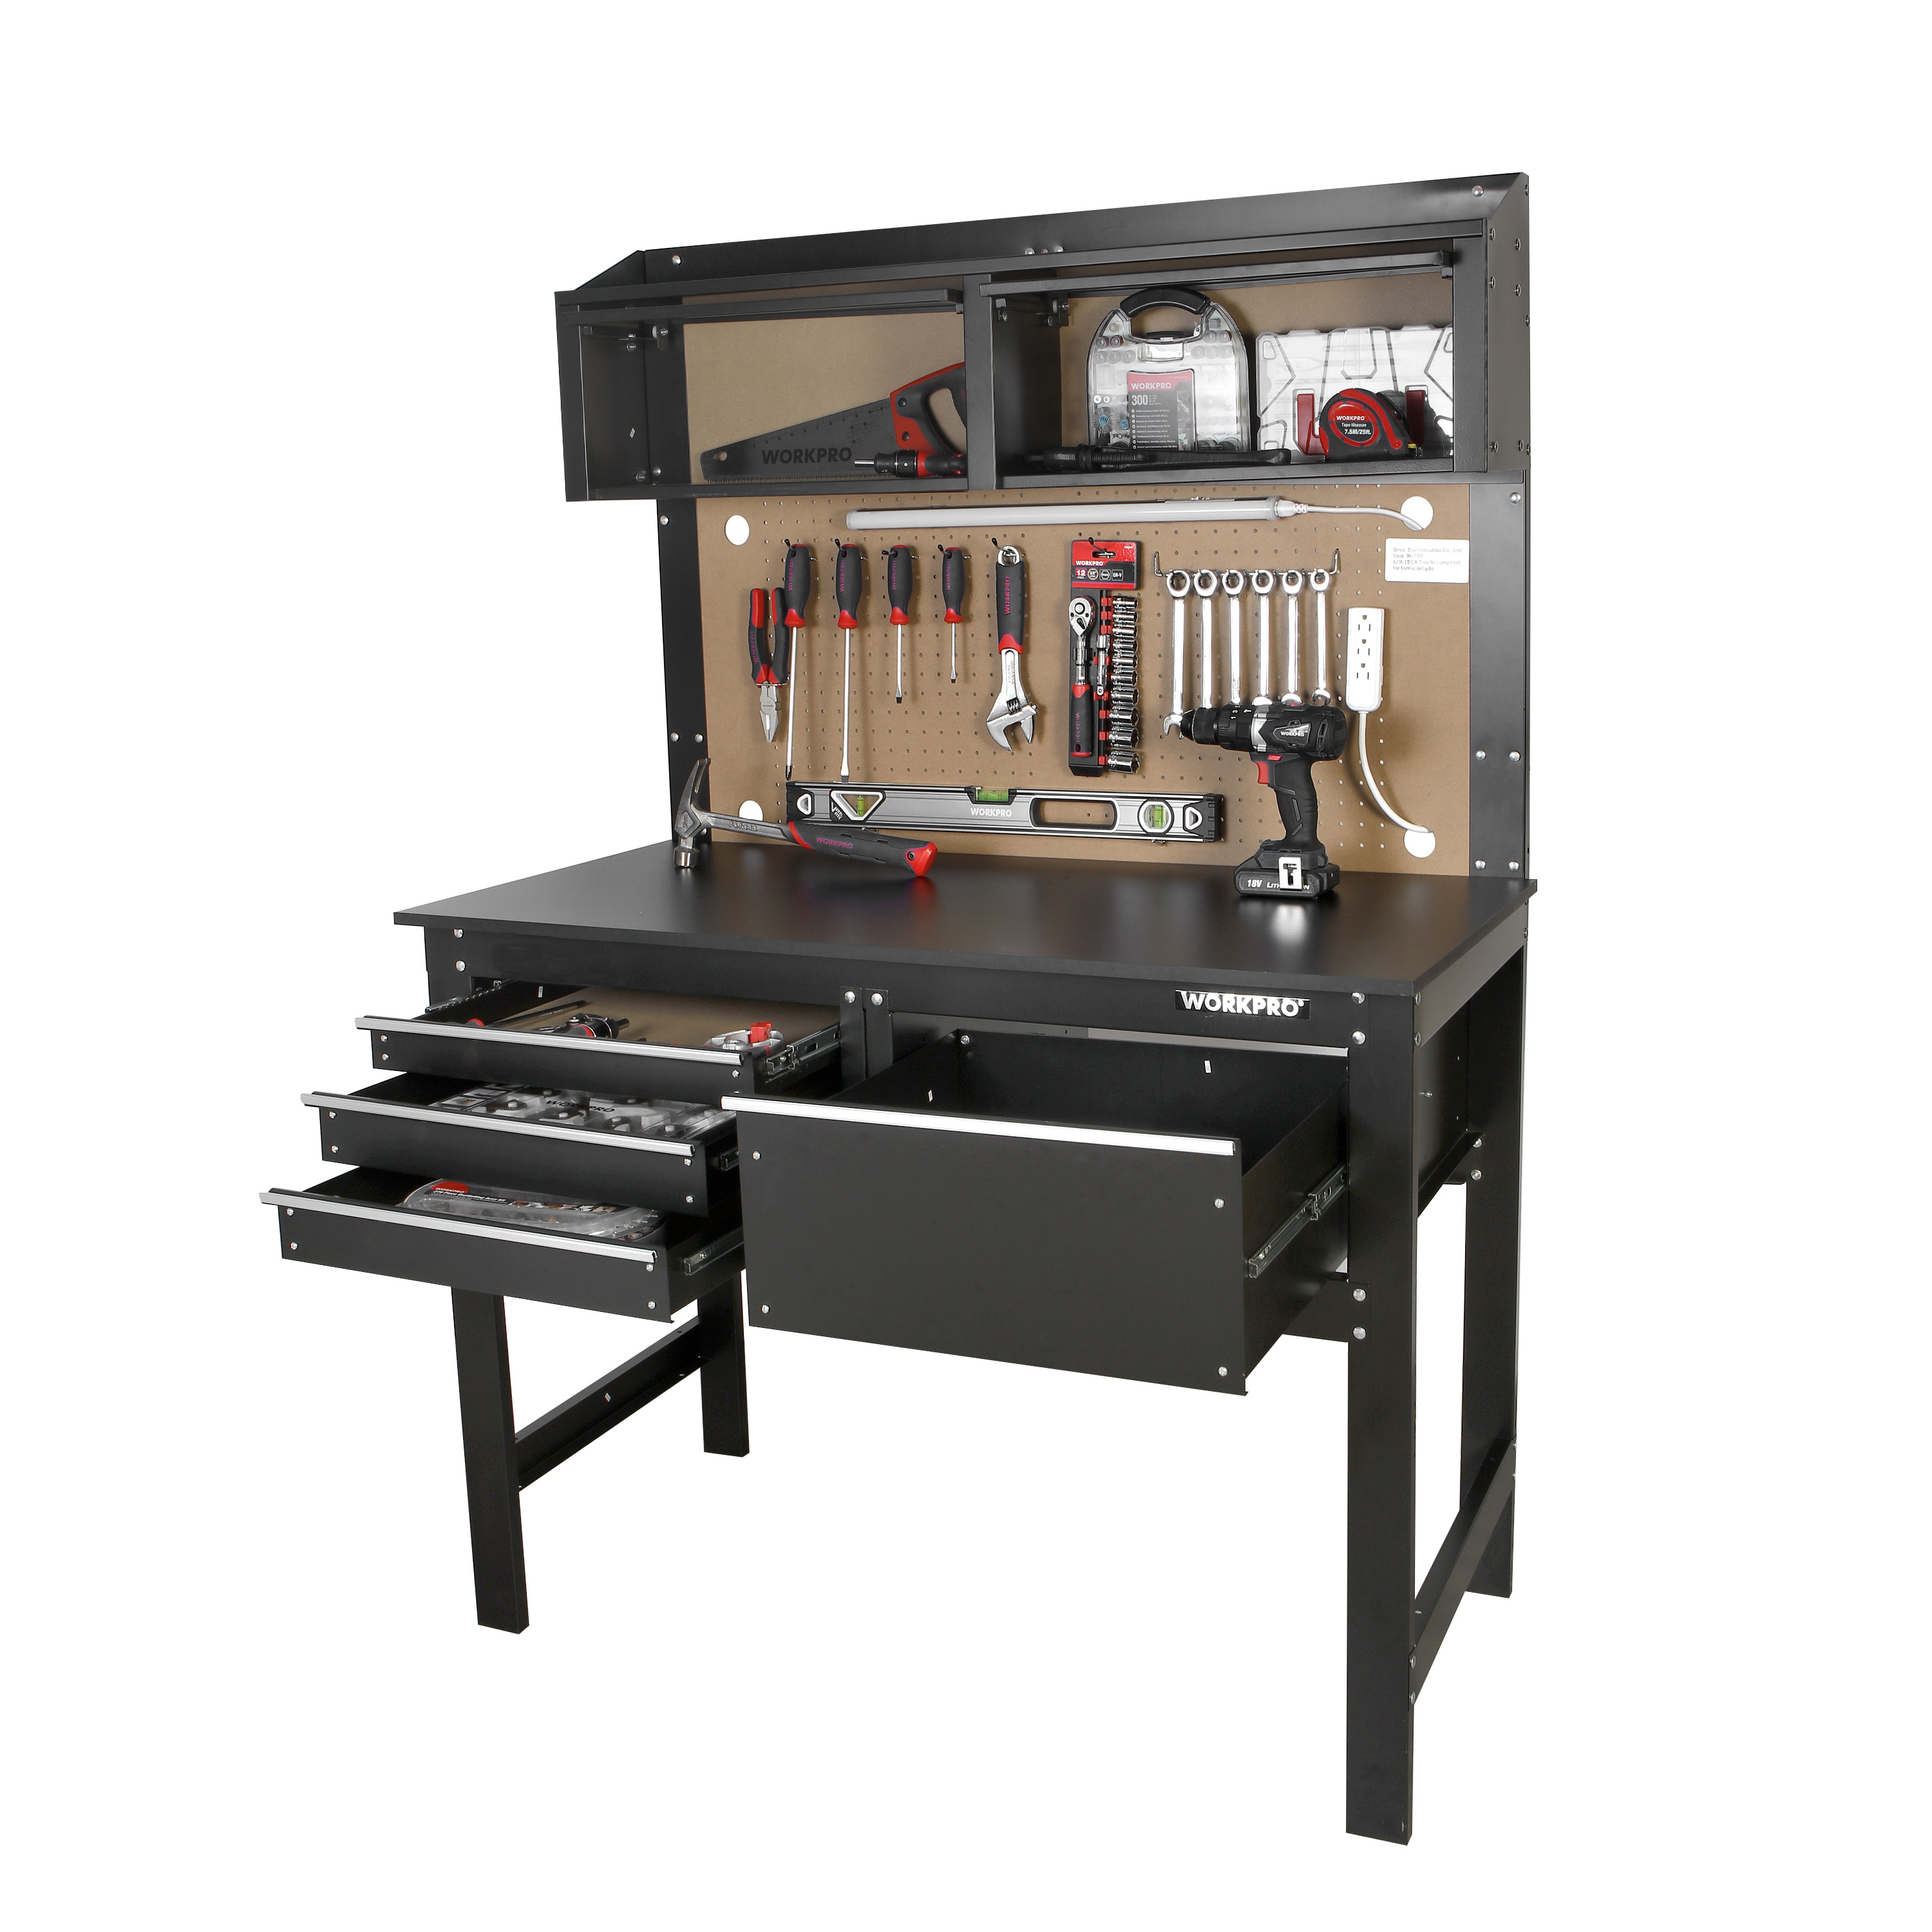 WORKPRO 2-in-1 48-inch Workbench and Cabinet Combo with Light, Steel, Wood - image 4 of 9